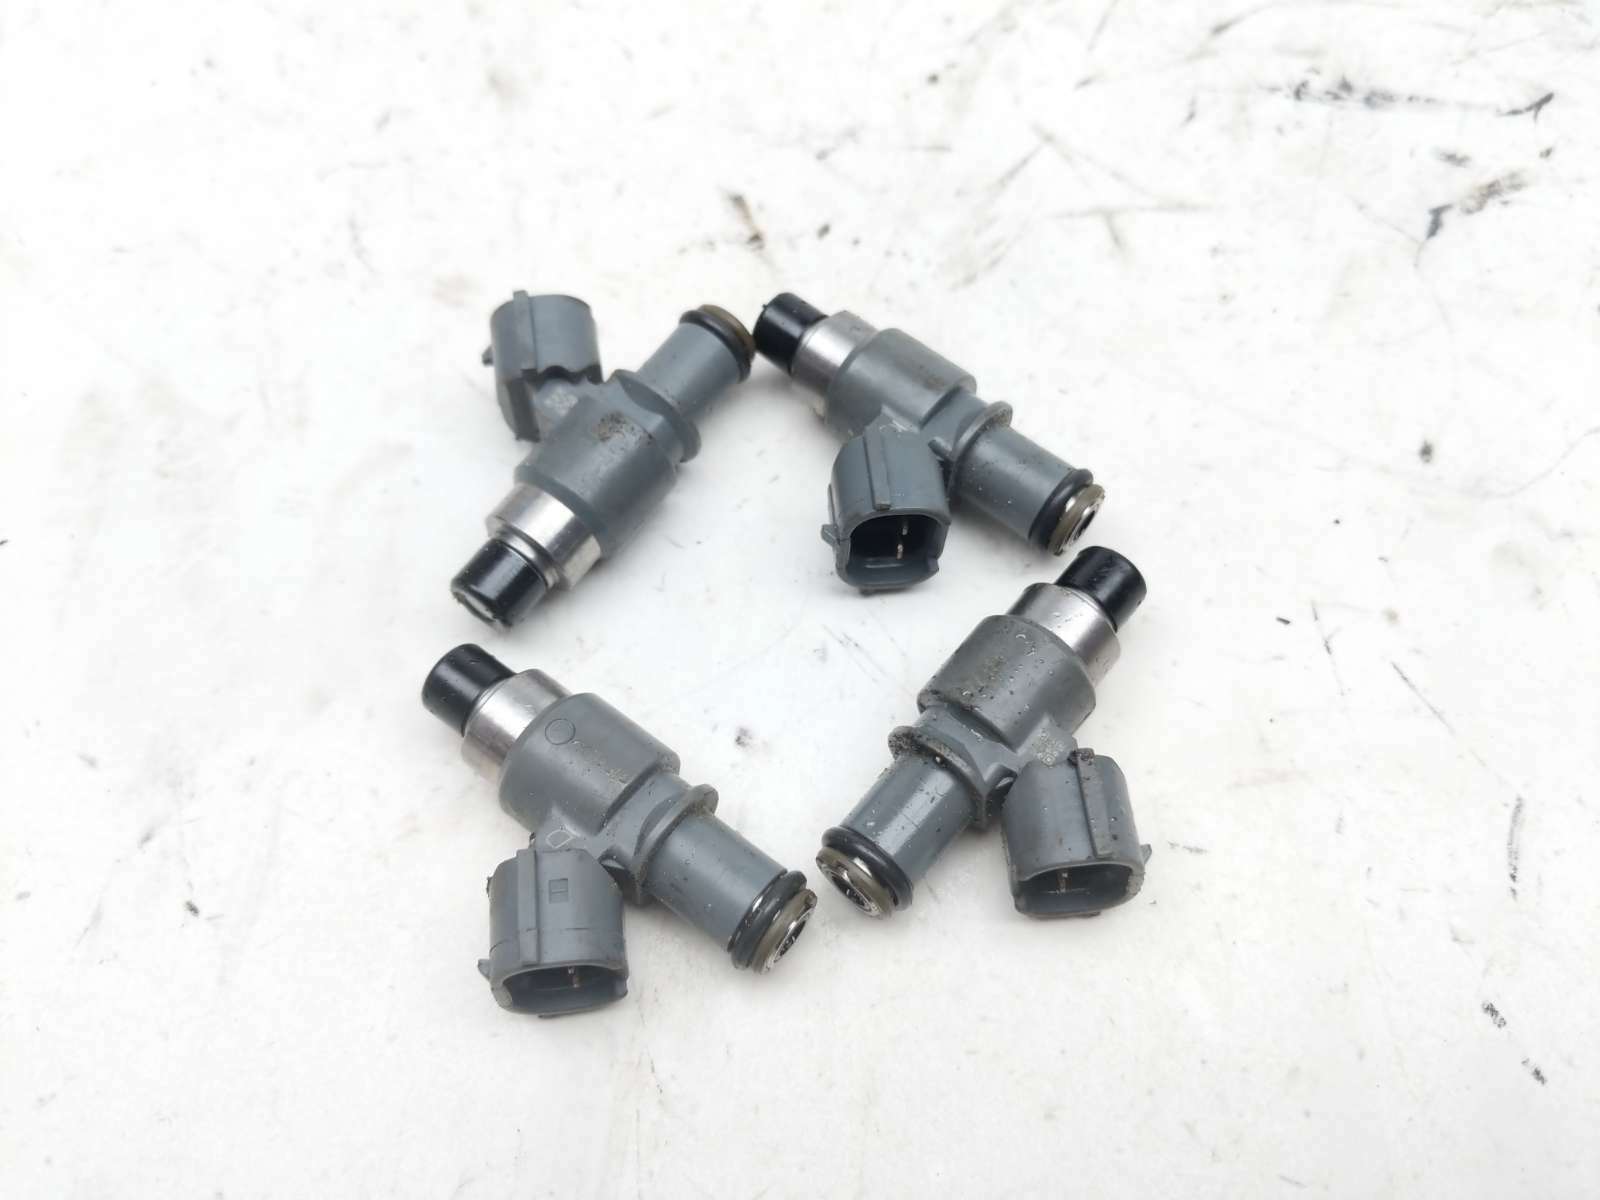 10 Honda CBR1000RR CBR 1000 Gas Fuel Injector without Rail